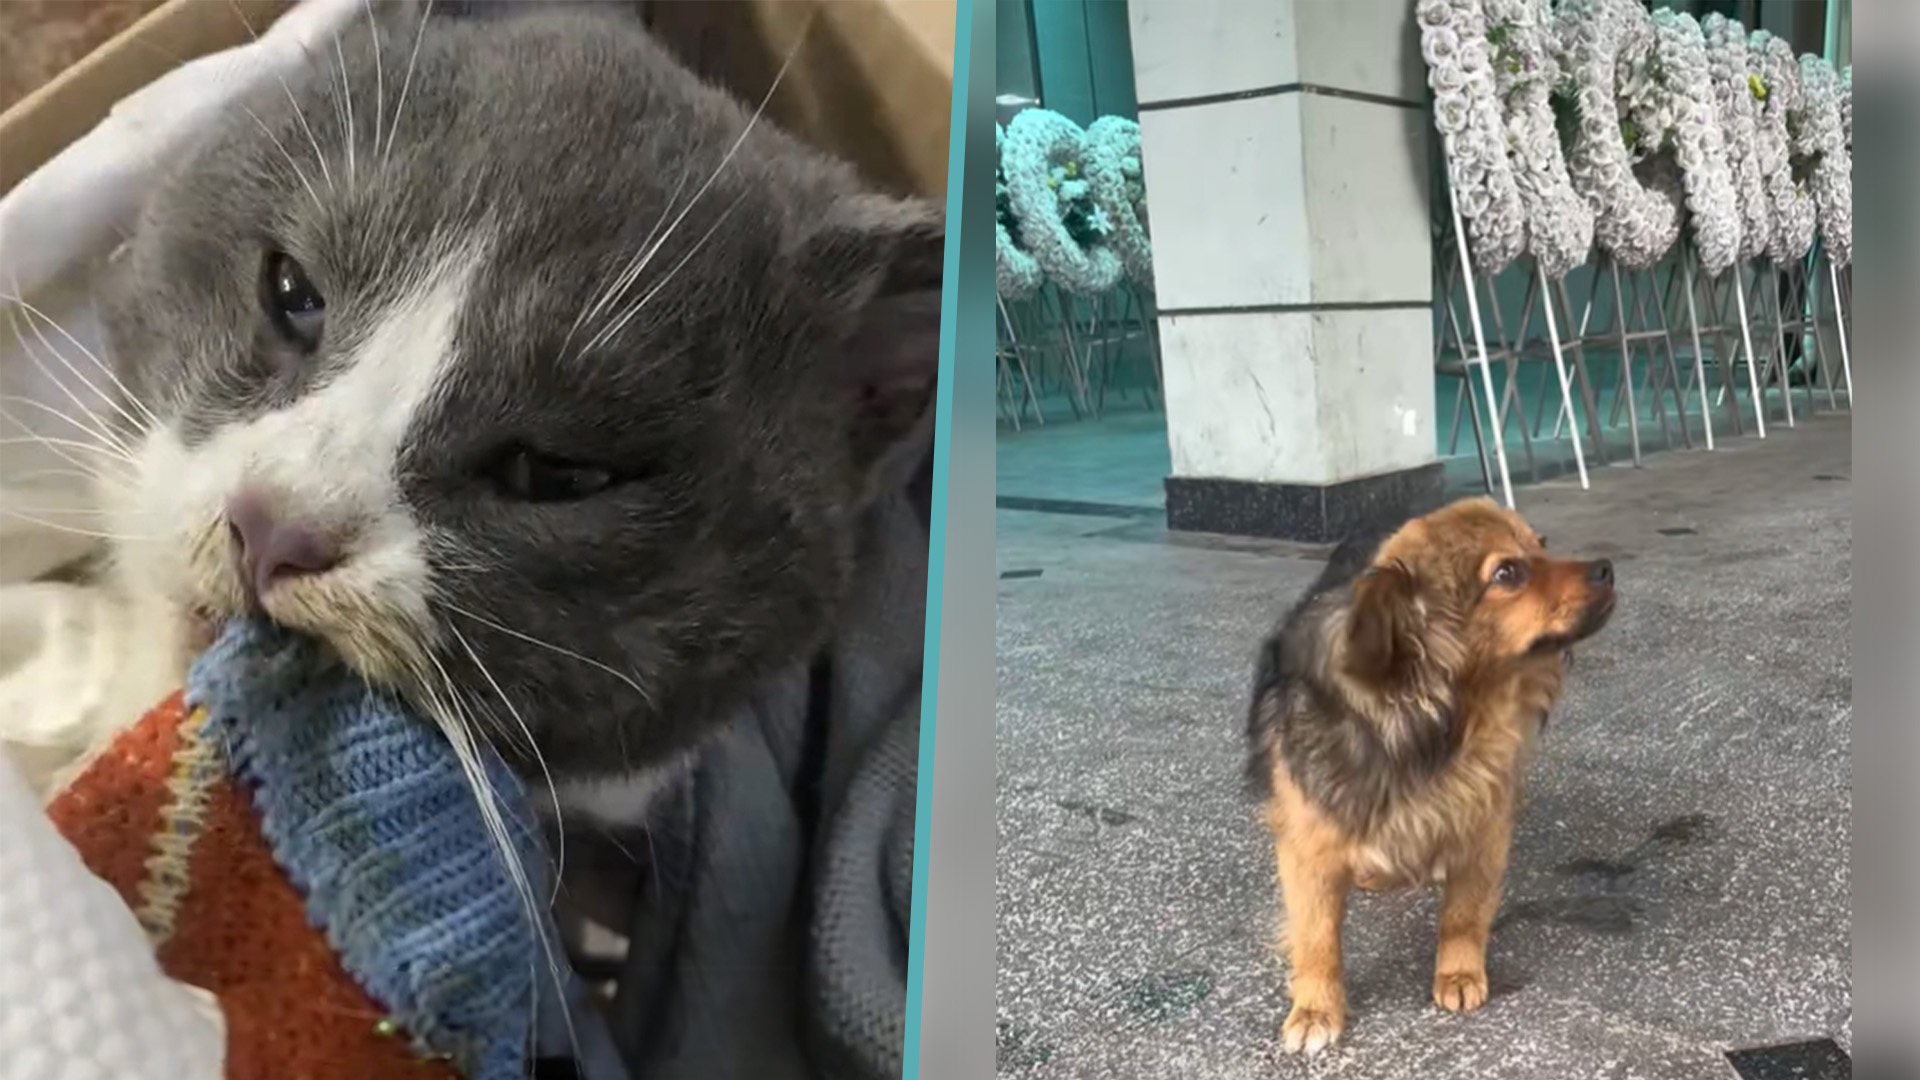 Pet passion: a dying cat hangs onto its owner’s sweater with its last breath and a disabled dog refuses to leave its master’s funeral, moving many people in China to tears. Photo: SCMP composite/Douyin